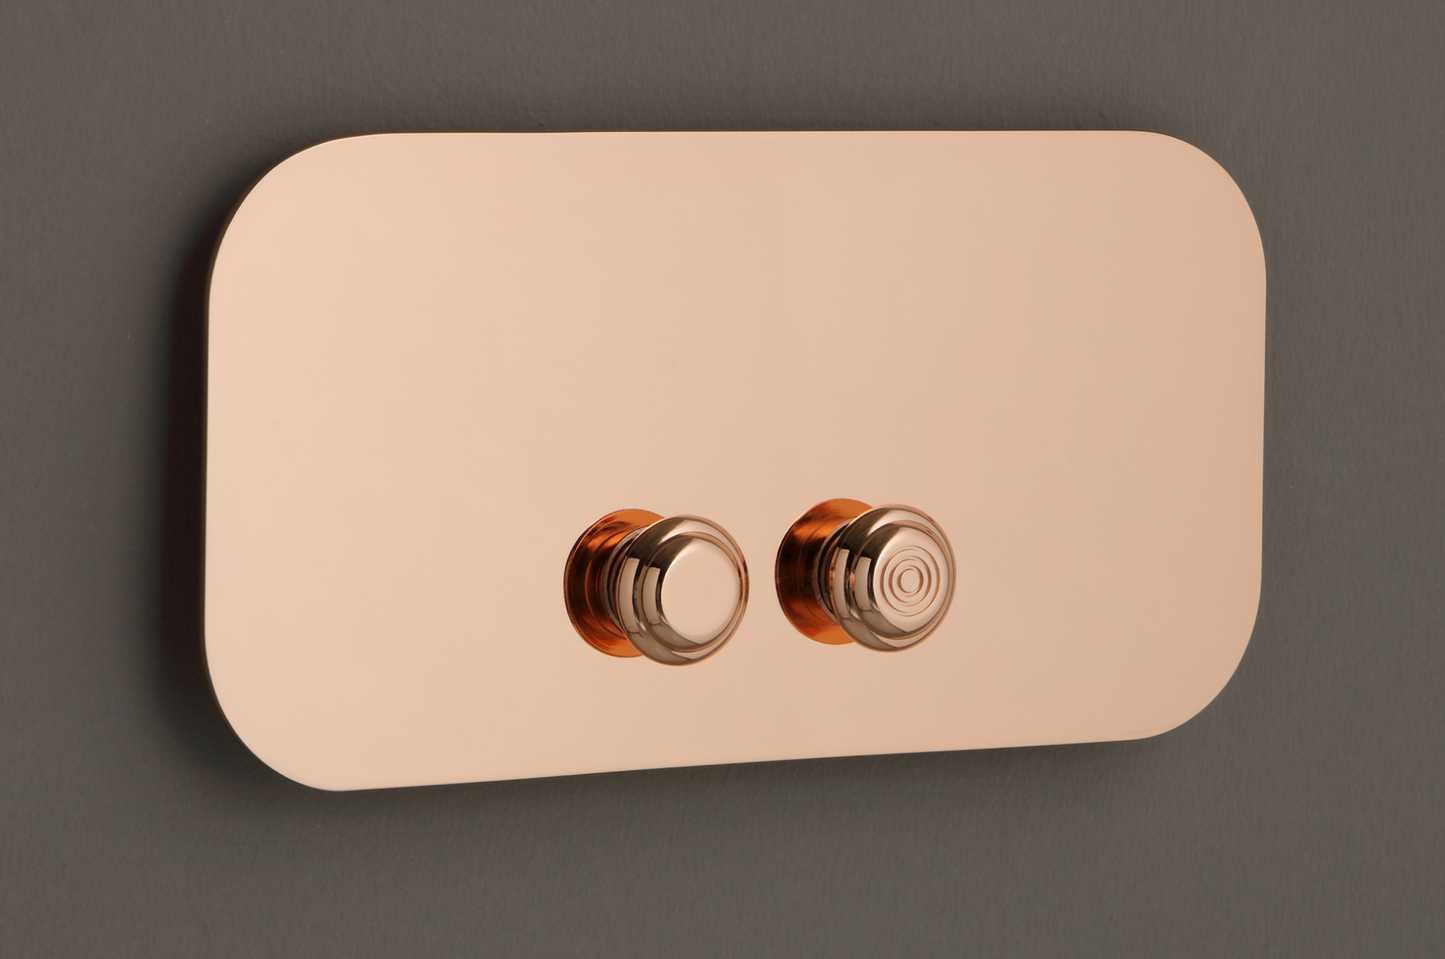 Drive plate 02 for Geberit Balneo Toscia Vintage style systems